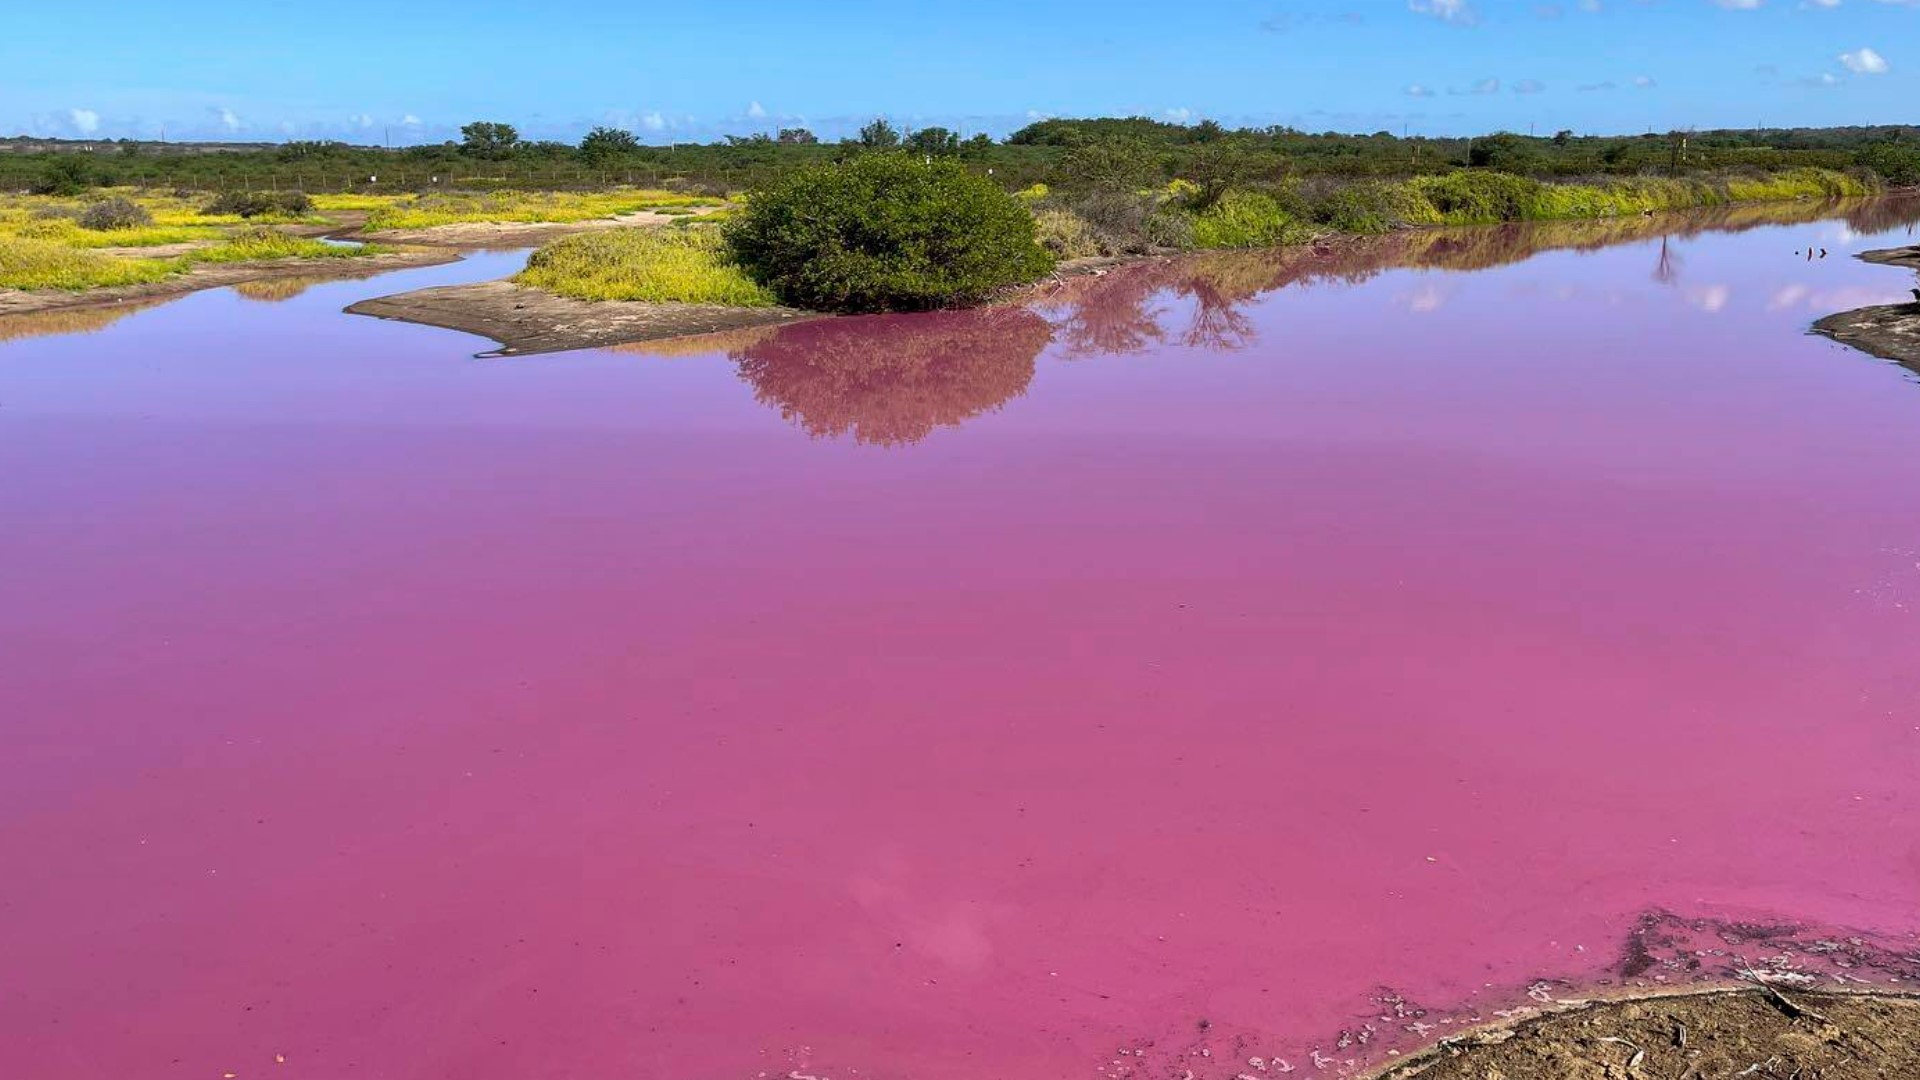 No one at the refuge has seen the pond this color before — not even volunteers who have been around it for 70 years.